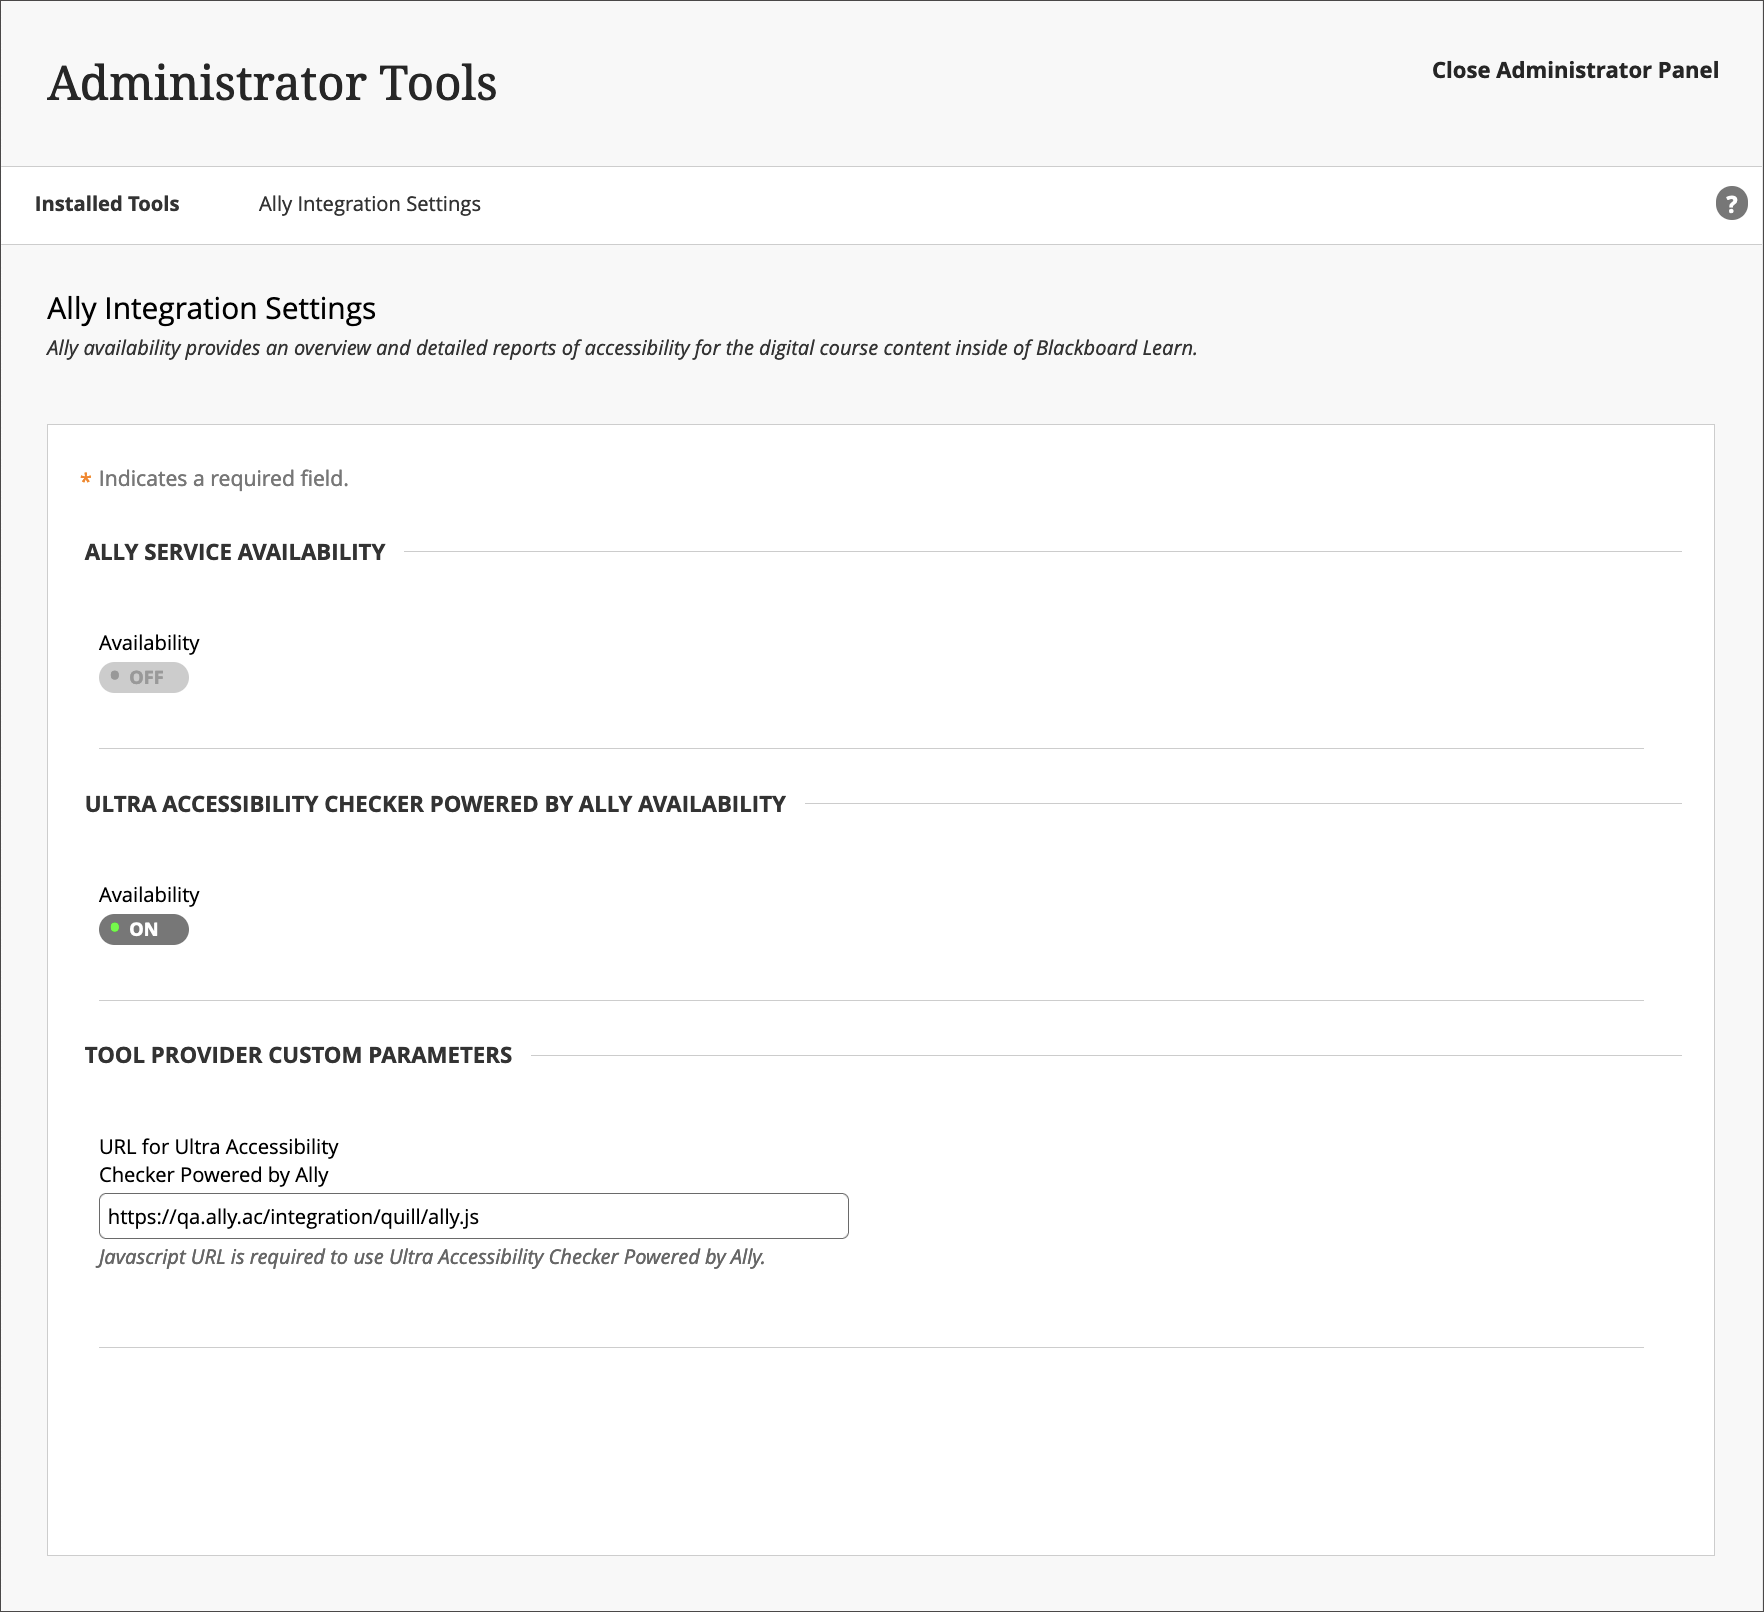 Administrator view – Ally Integration Settings